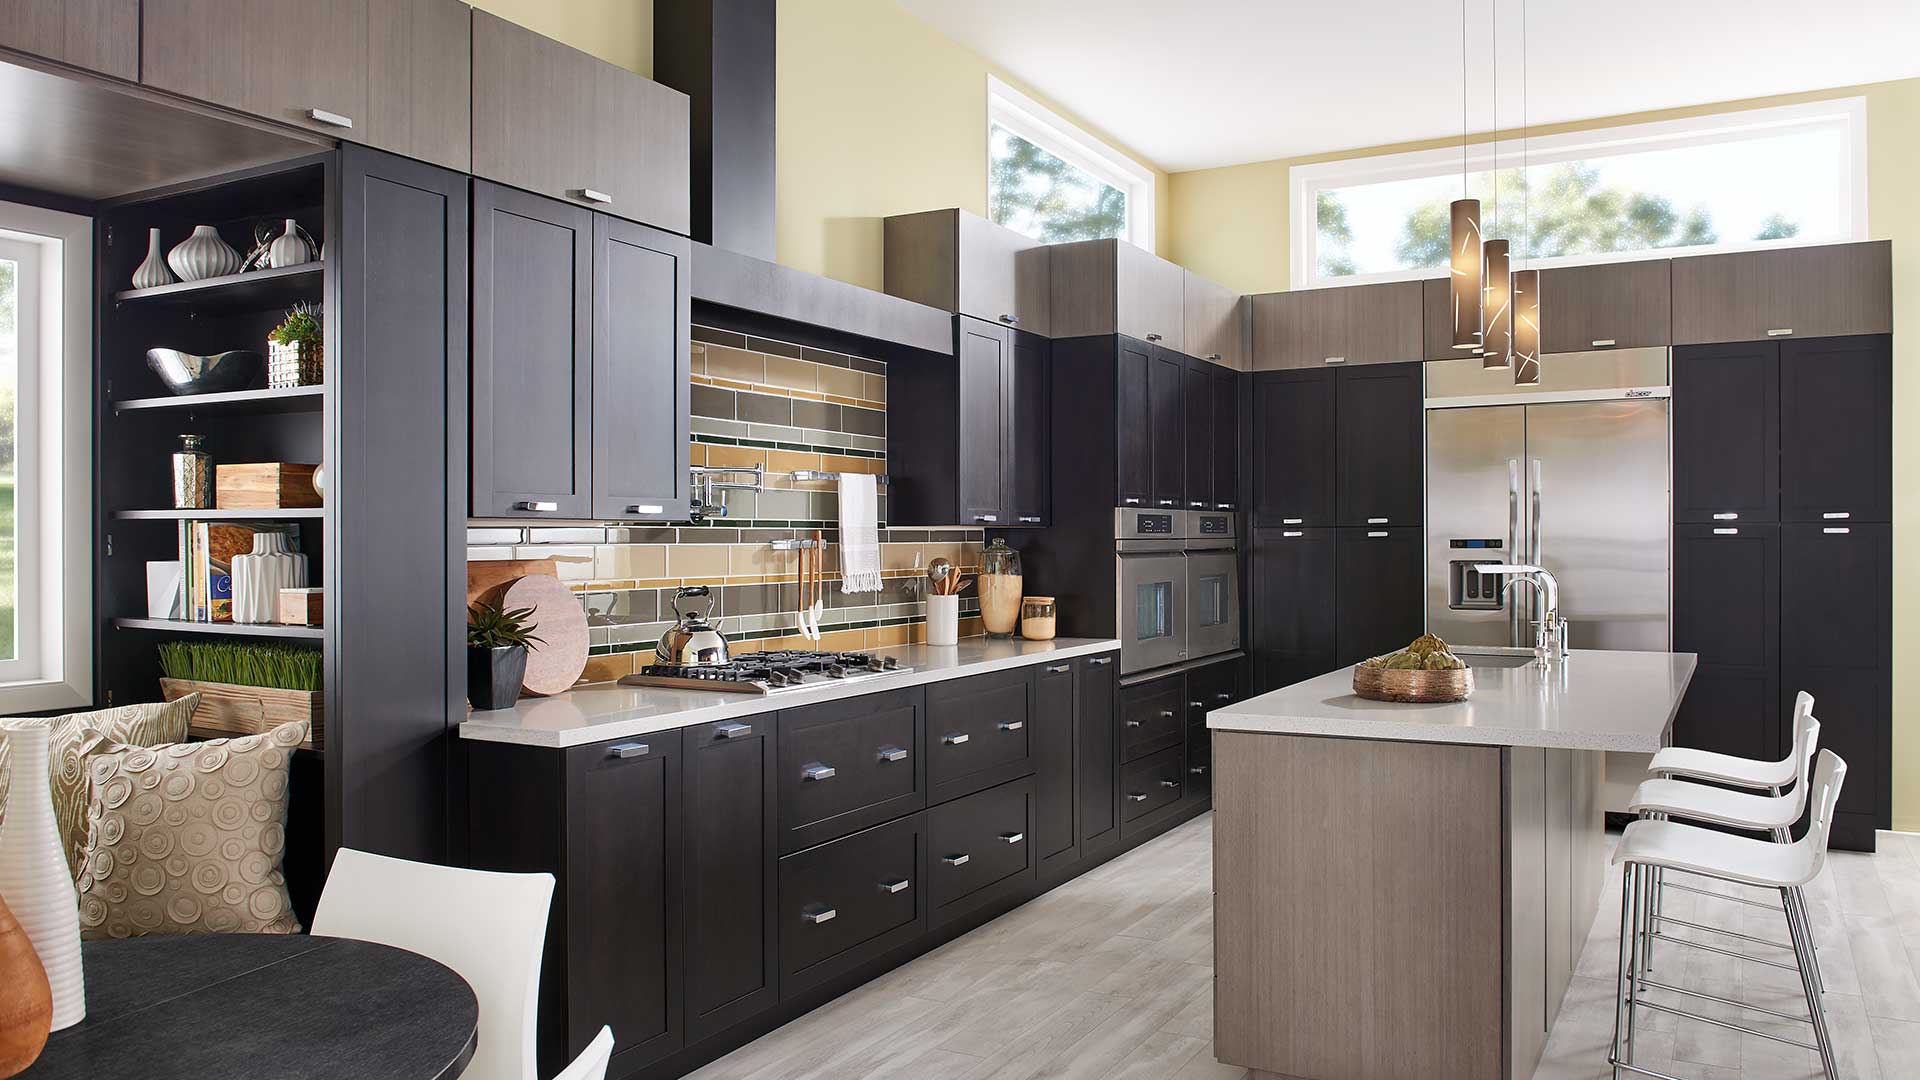 A kitchen with black cabinets and white counter tops.